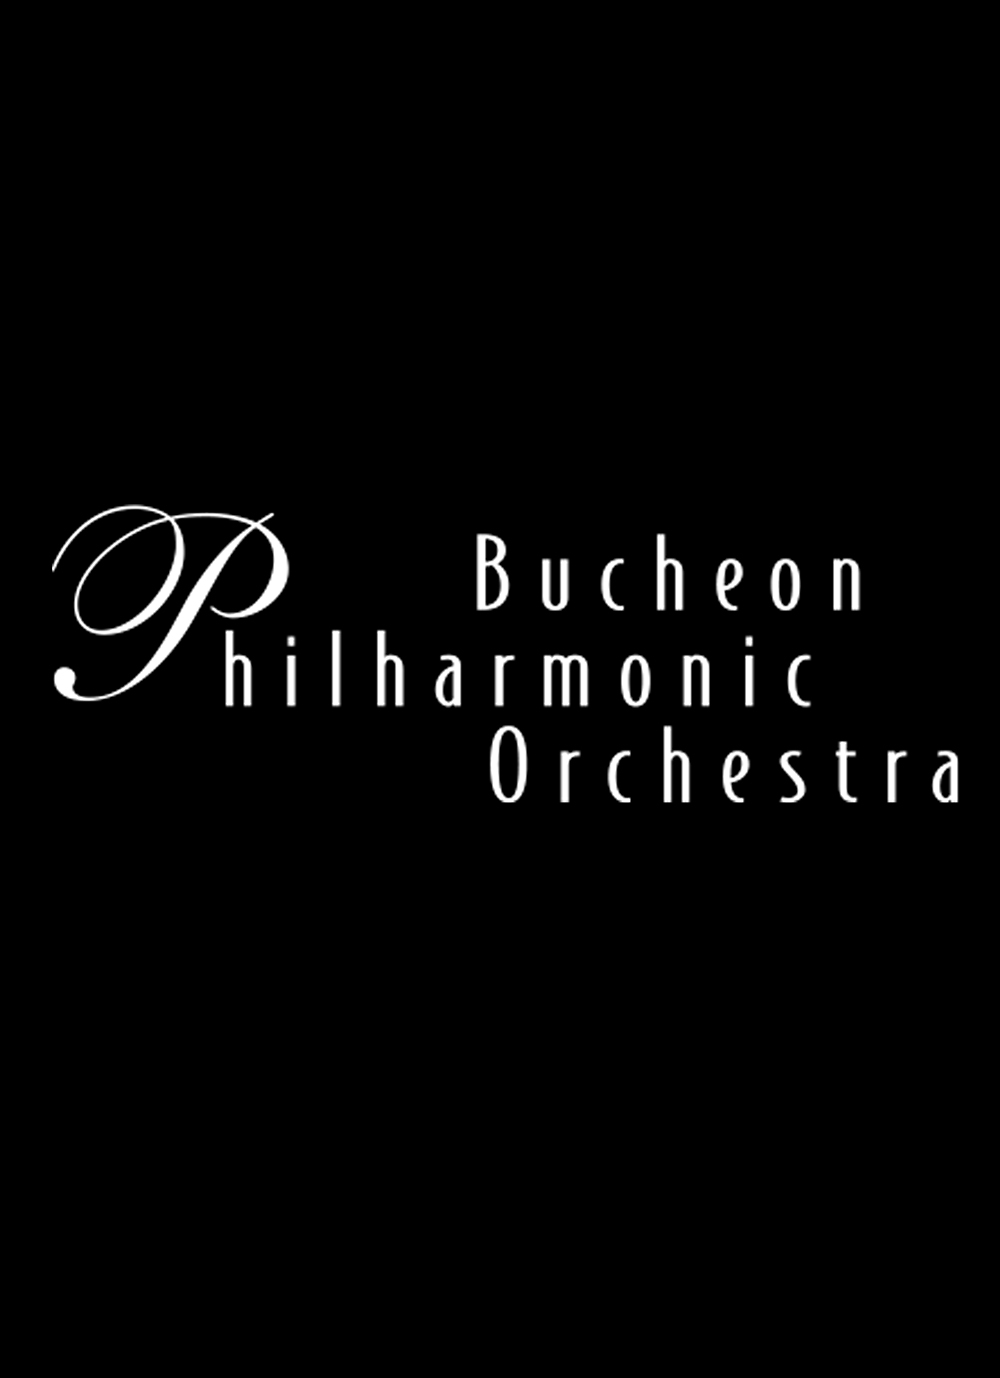 Bucheon Philharmonic Orchestra Project Concert - Ballet Music with Storytelling